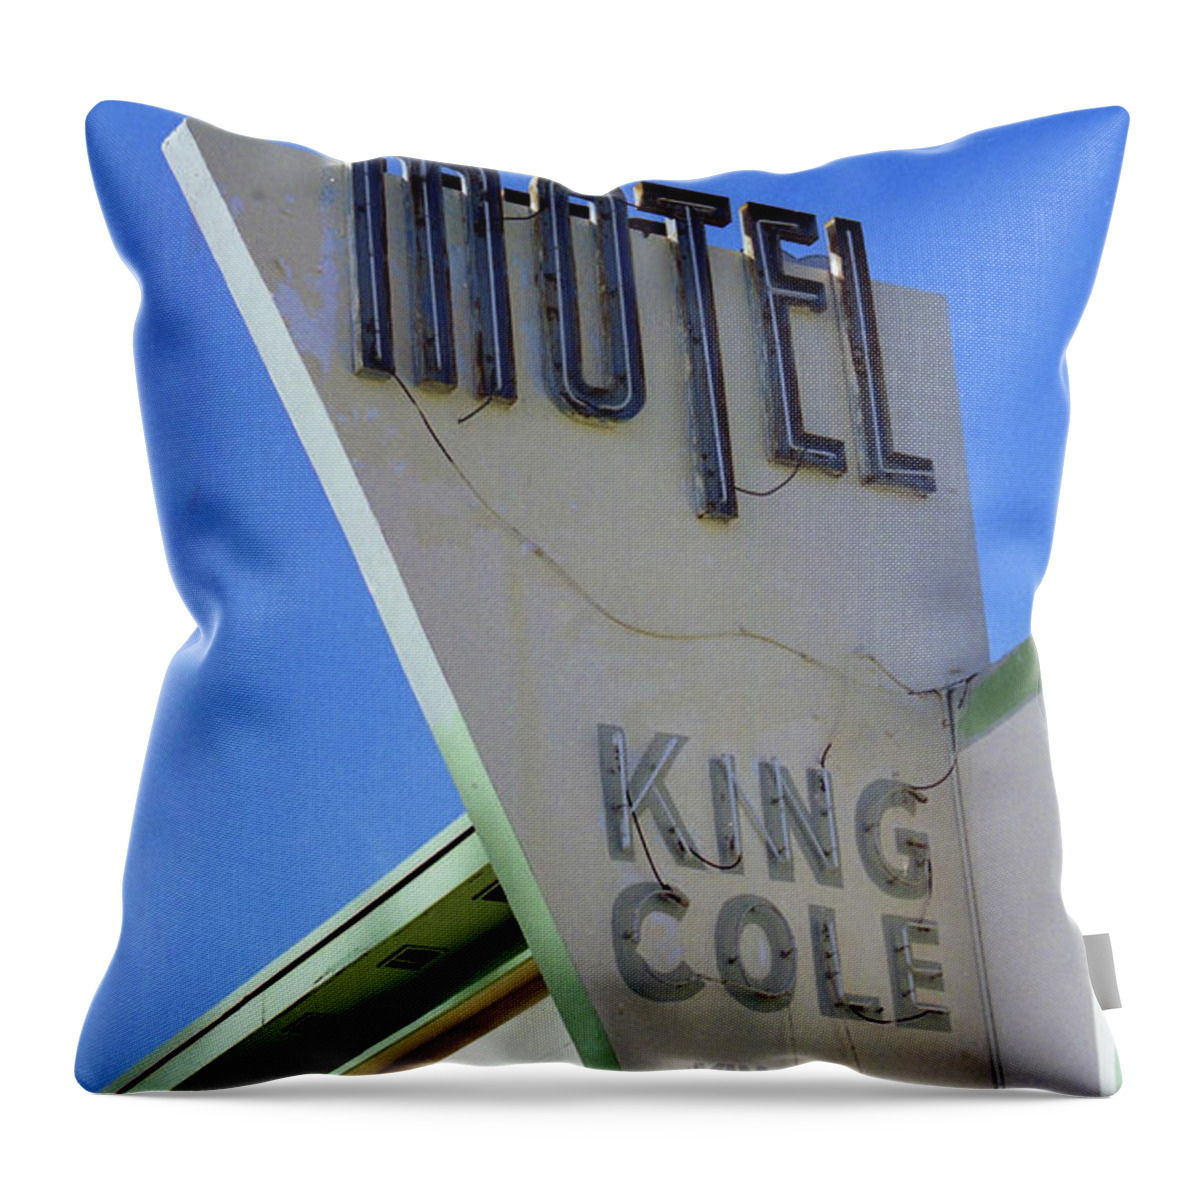 Pool Throw Pillow featuring the photograph Motel King Cole by Matthew Bamberg